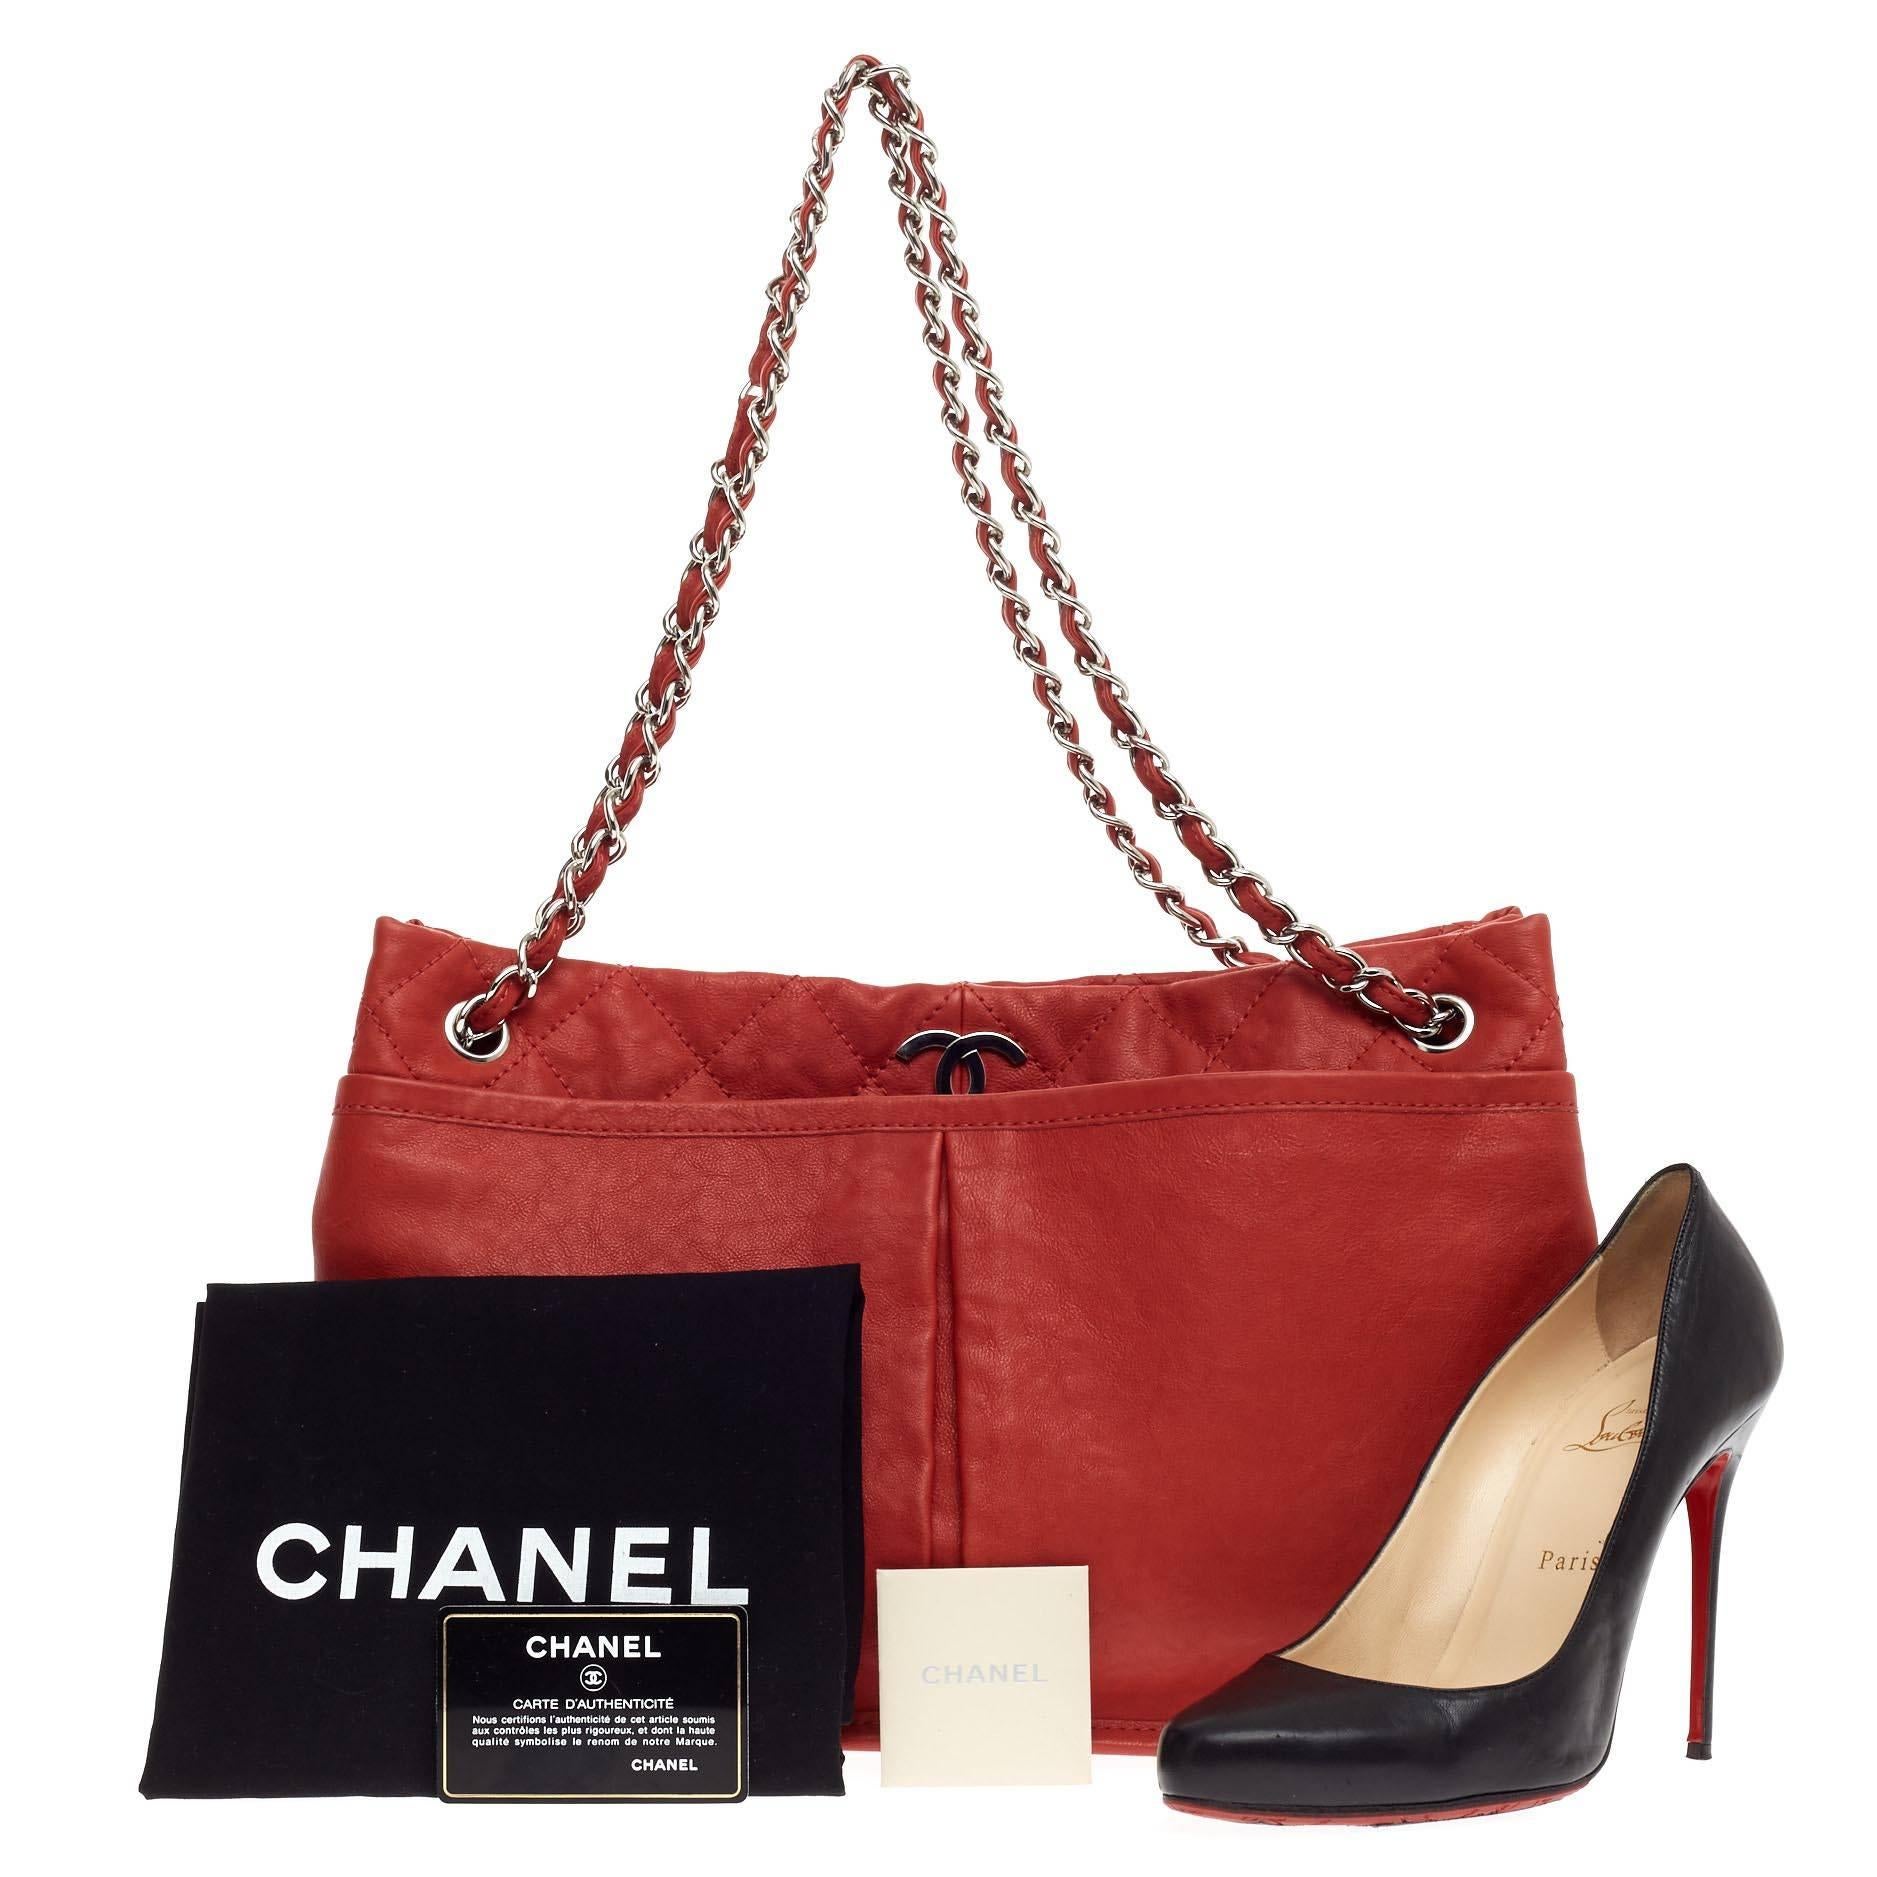 This authentic Chanel Natural Beauty Tote Leather showcases the brand's classic style with everyday functionality perfect for the modern woman. Crafted from supple vivid red leather, this elegant tote features diamond quilted top trims, dual